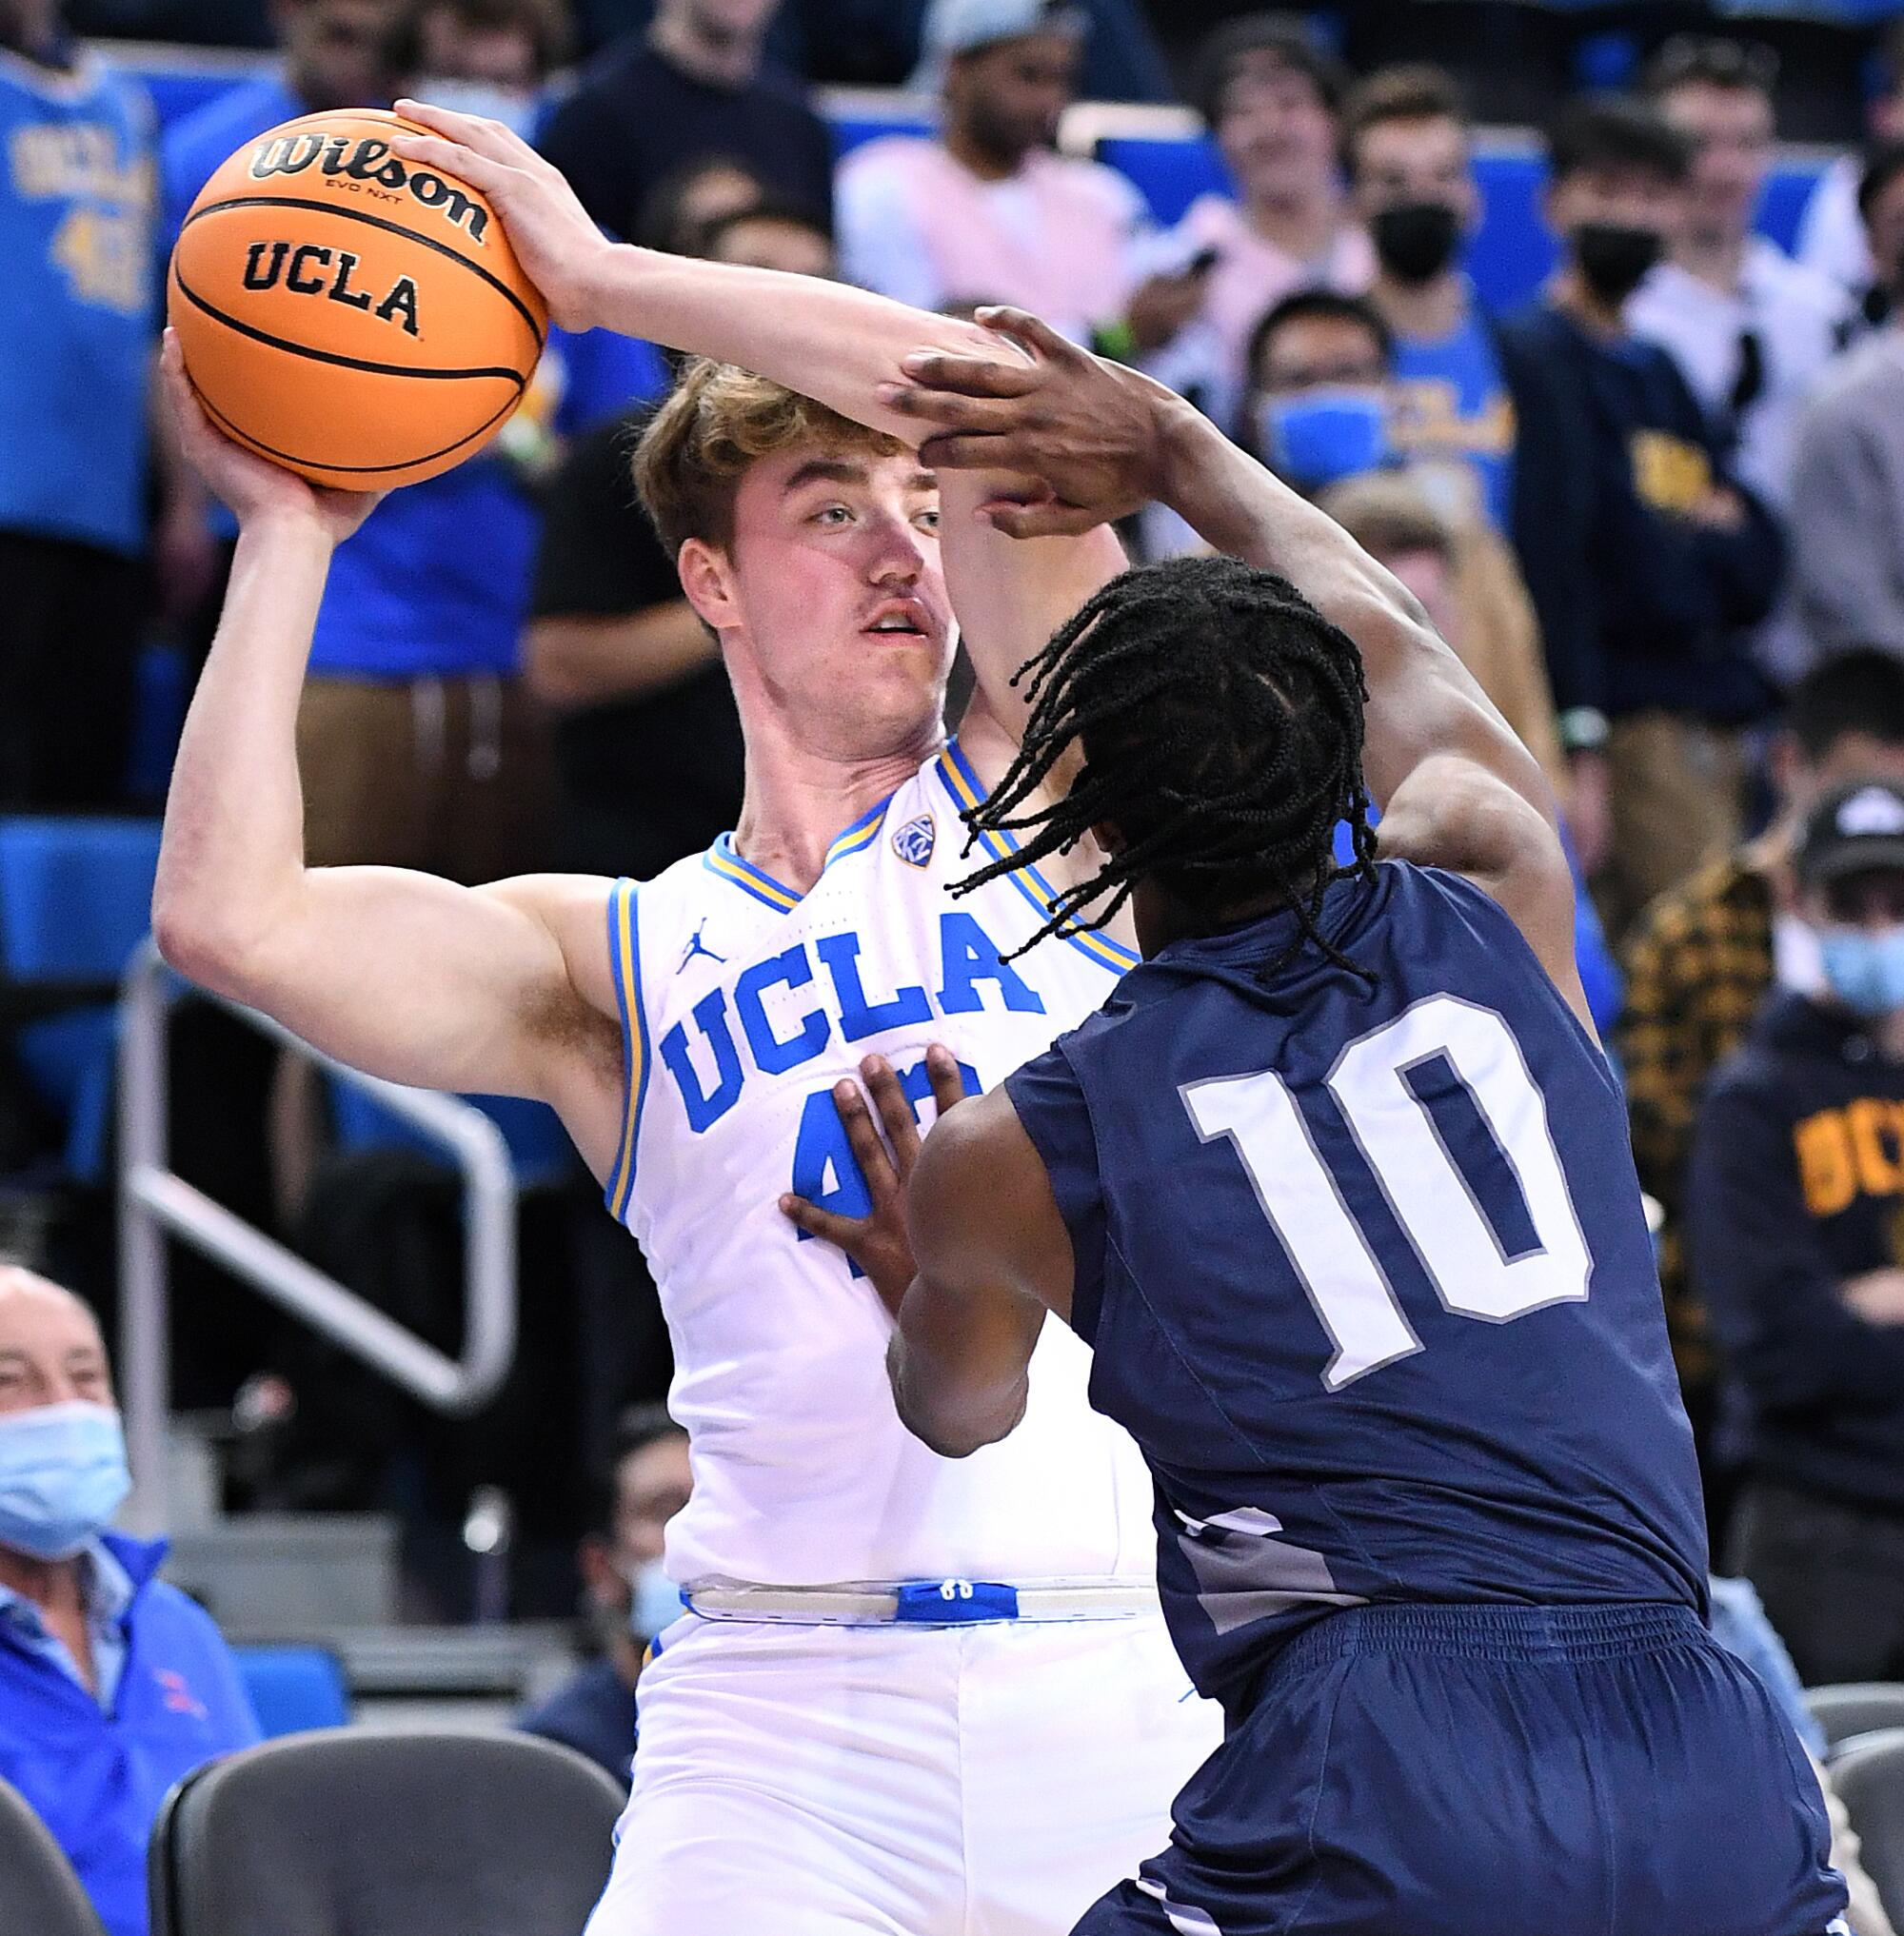 UCLA's Russell Stong holds the ball during a recent game against Northern Florida 